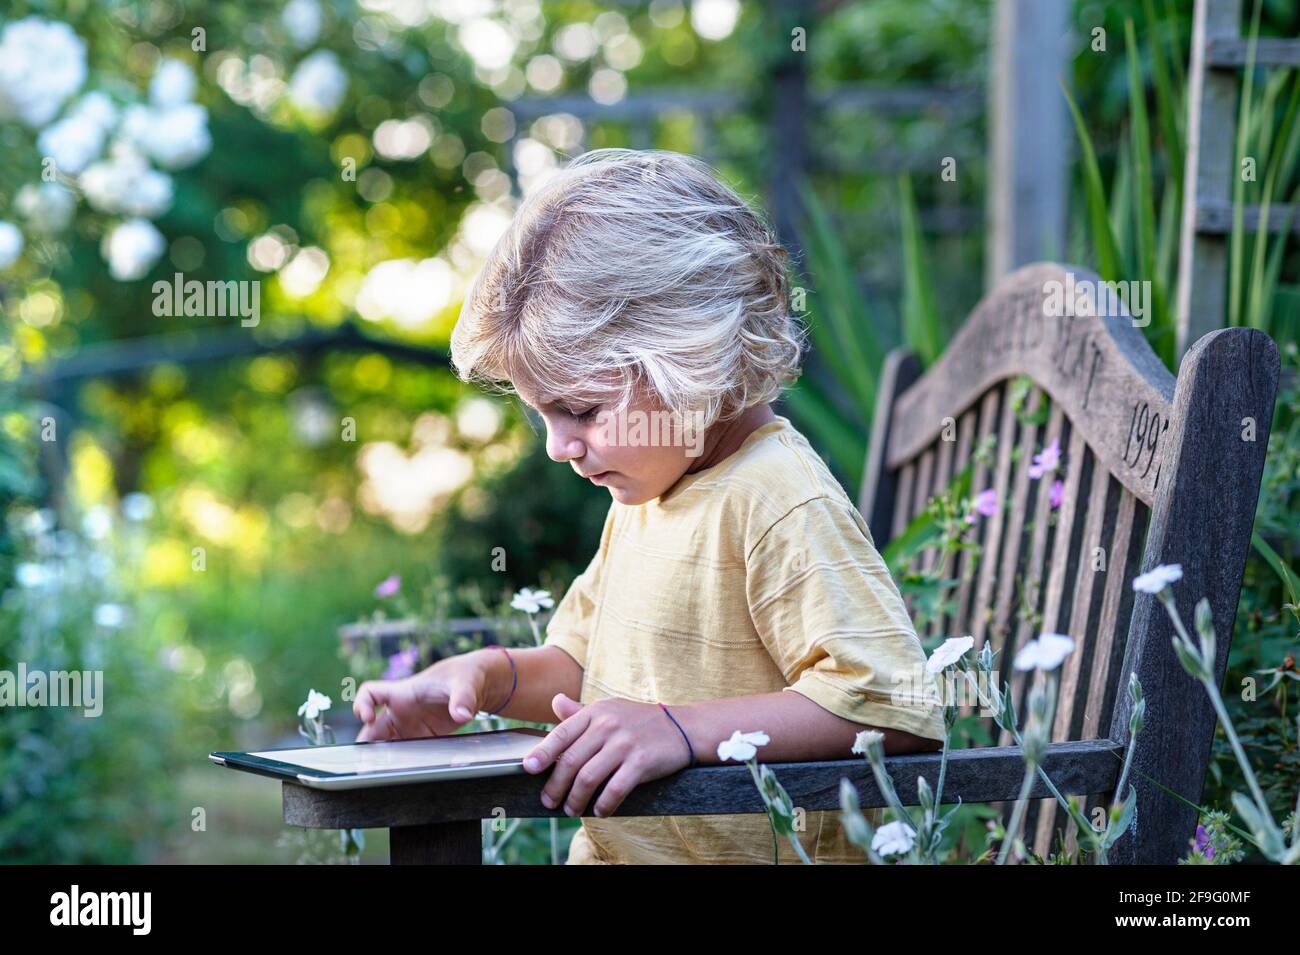 Childhood environment outdoors Infant blond boy 4-6 years outdoors concentrating with his smart tablet iPad computer in sunlit secure floral garden Stock Photo